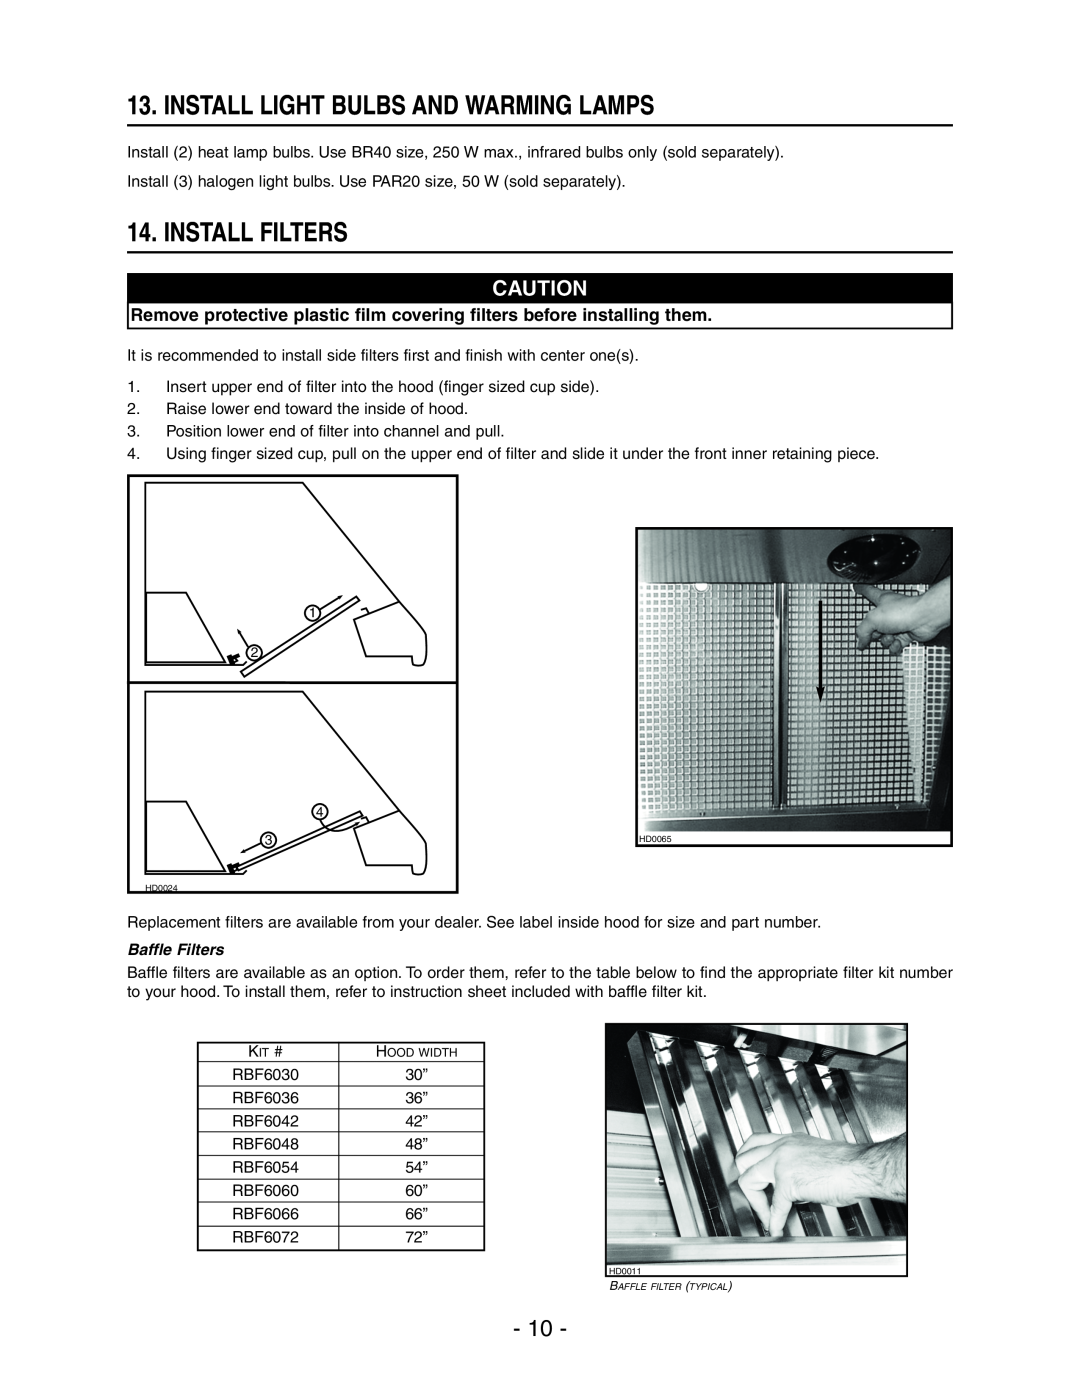 NuTone NP60000 installation instructions Install Light Bulbs And Warming Lamps, Install Filters, Baffle Filters 